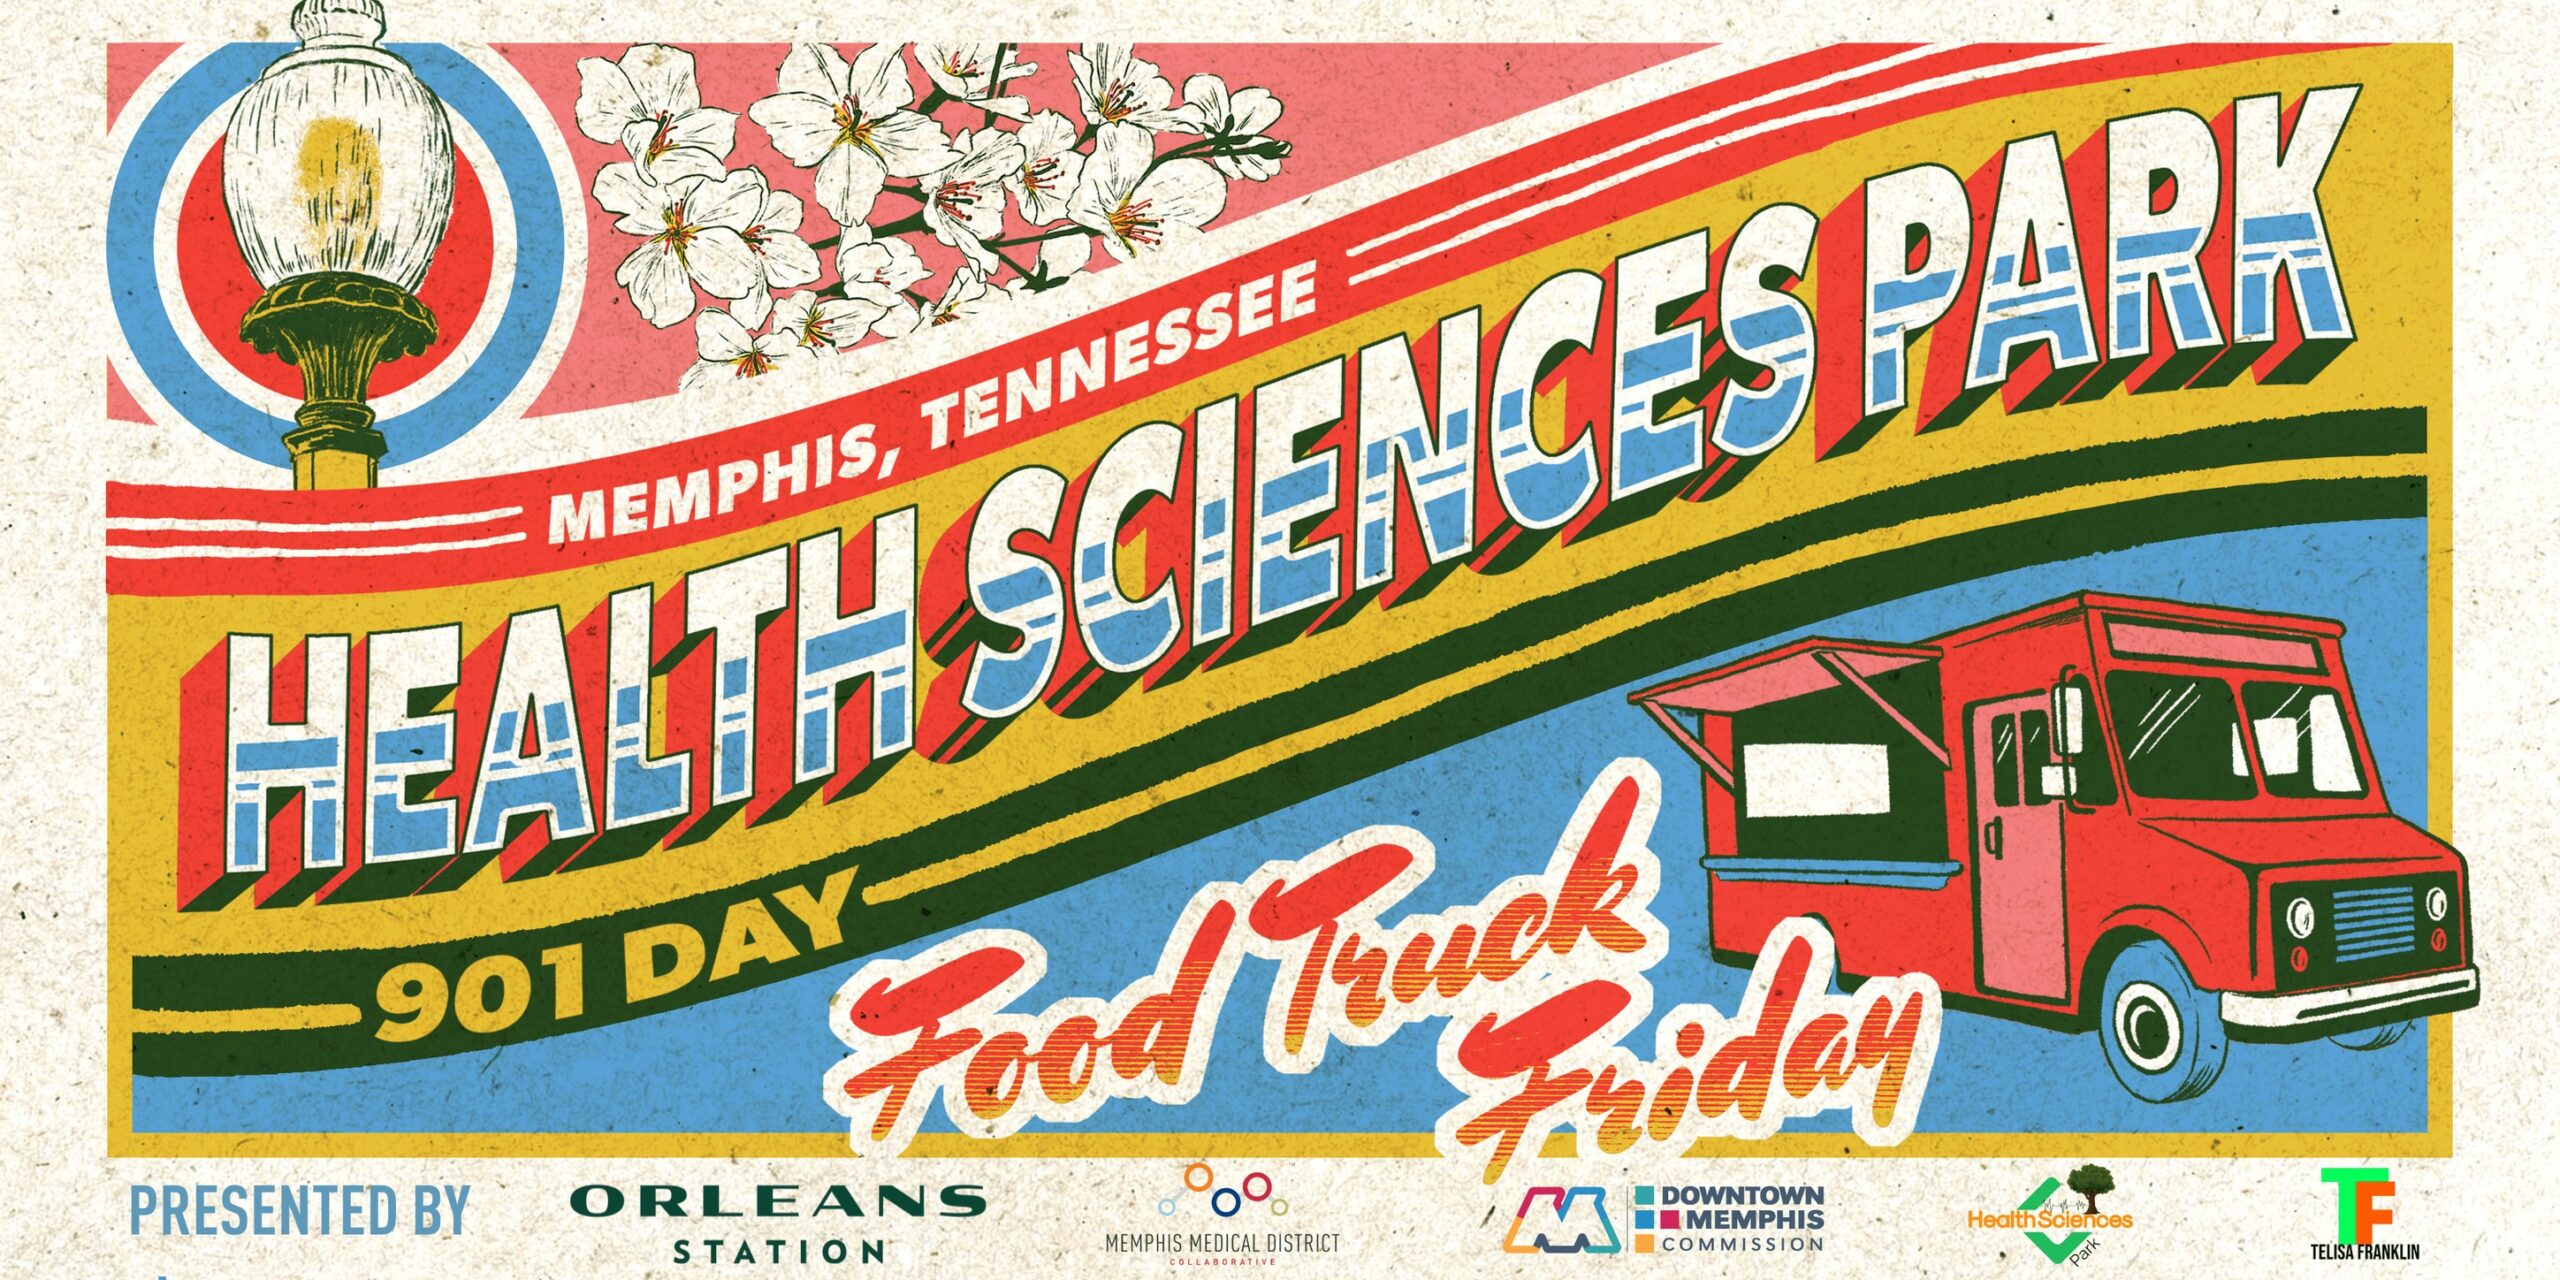 A poster for Food Truck Friday at the health science park's 901 Day celebration.